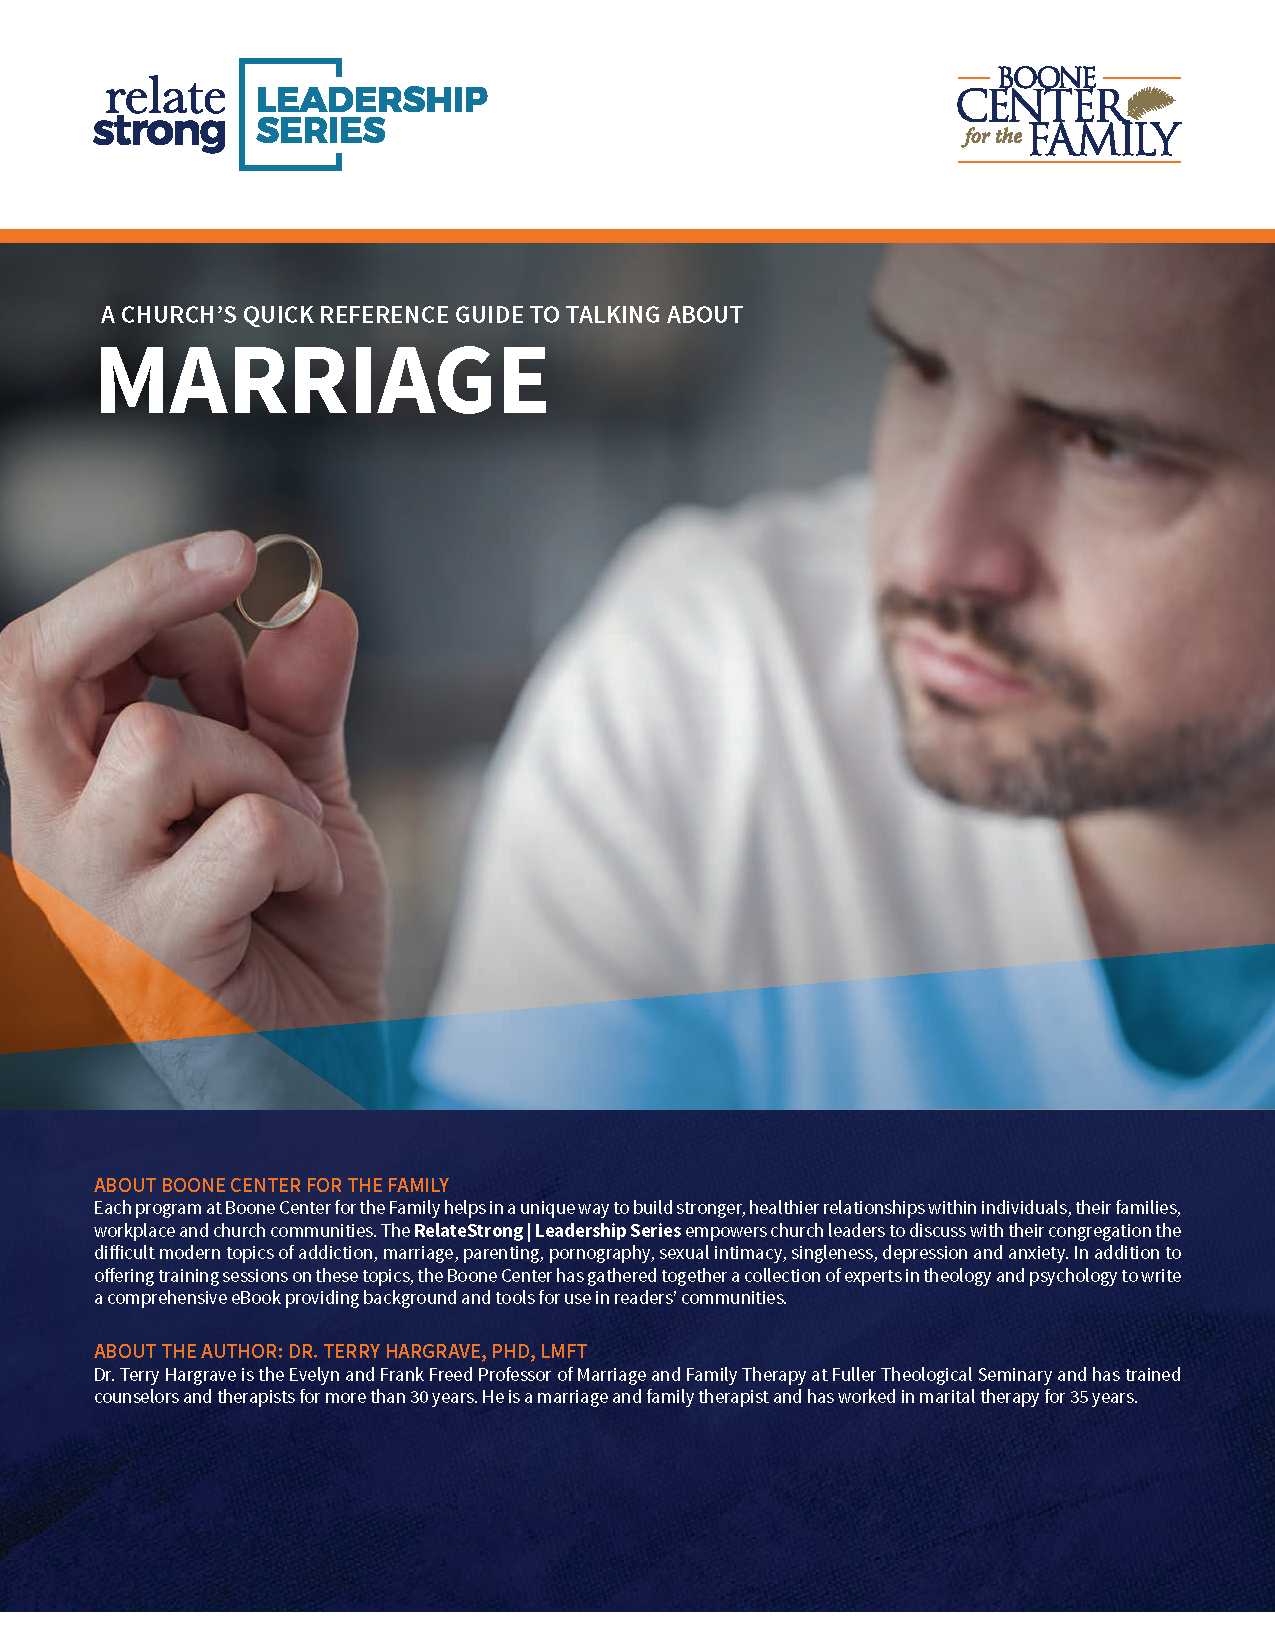 QUICK REFERENCE GUIDE - Talking about Marriage